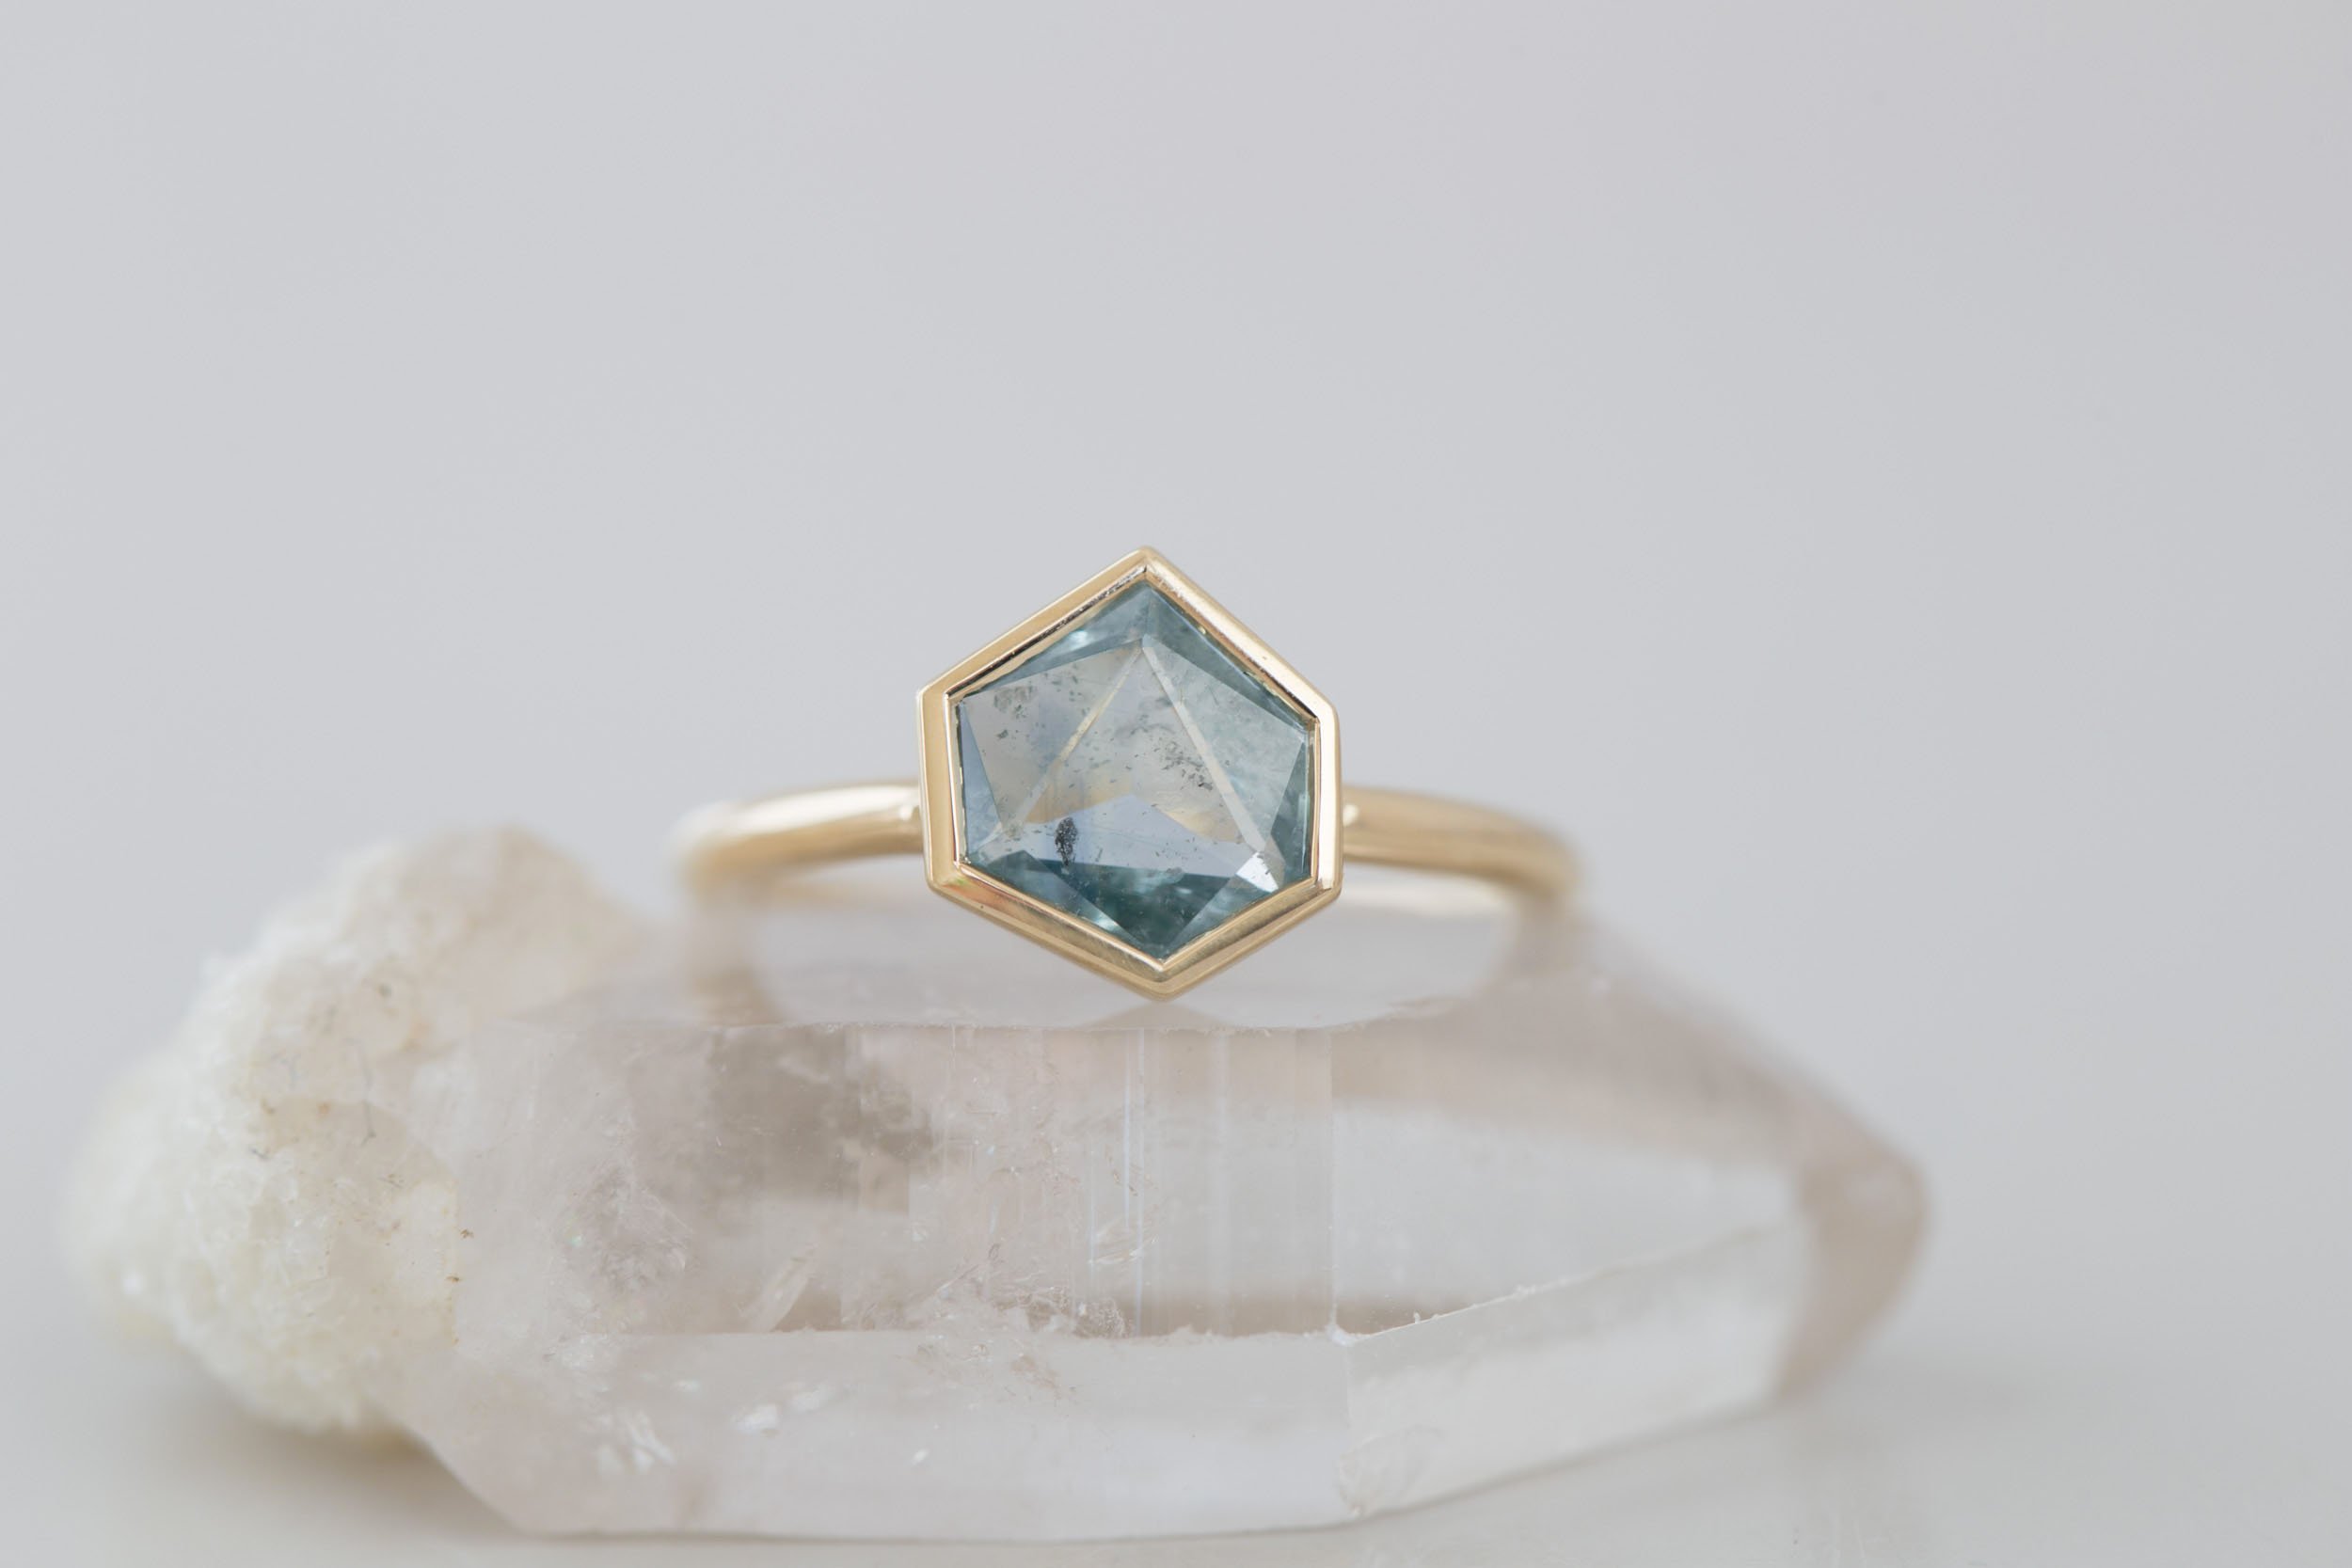 Deter Leidinggevende condoom Avens Ring | Mint Geocut Sapphire Engagement Ring 1.93 ct | 14k Recycled  Gold | One of a Kind — Mineralogy